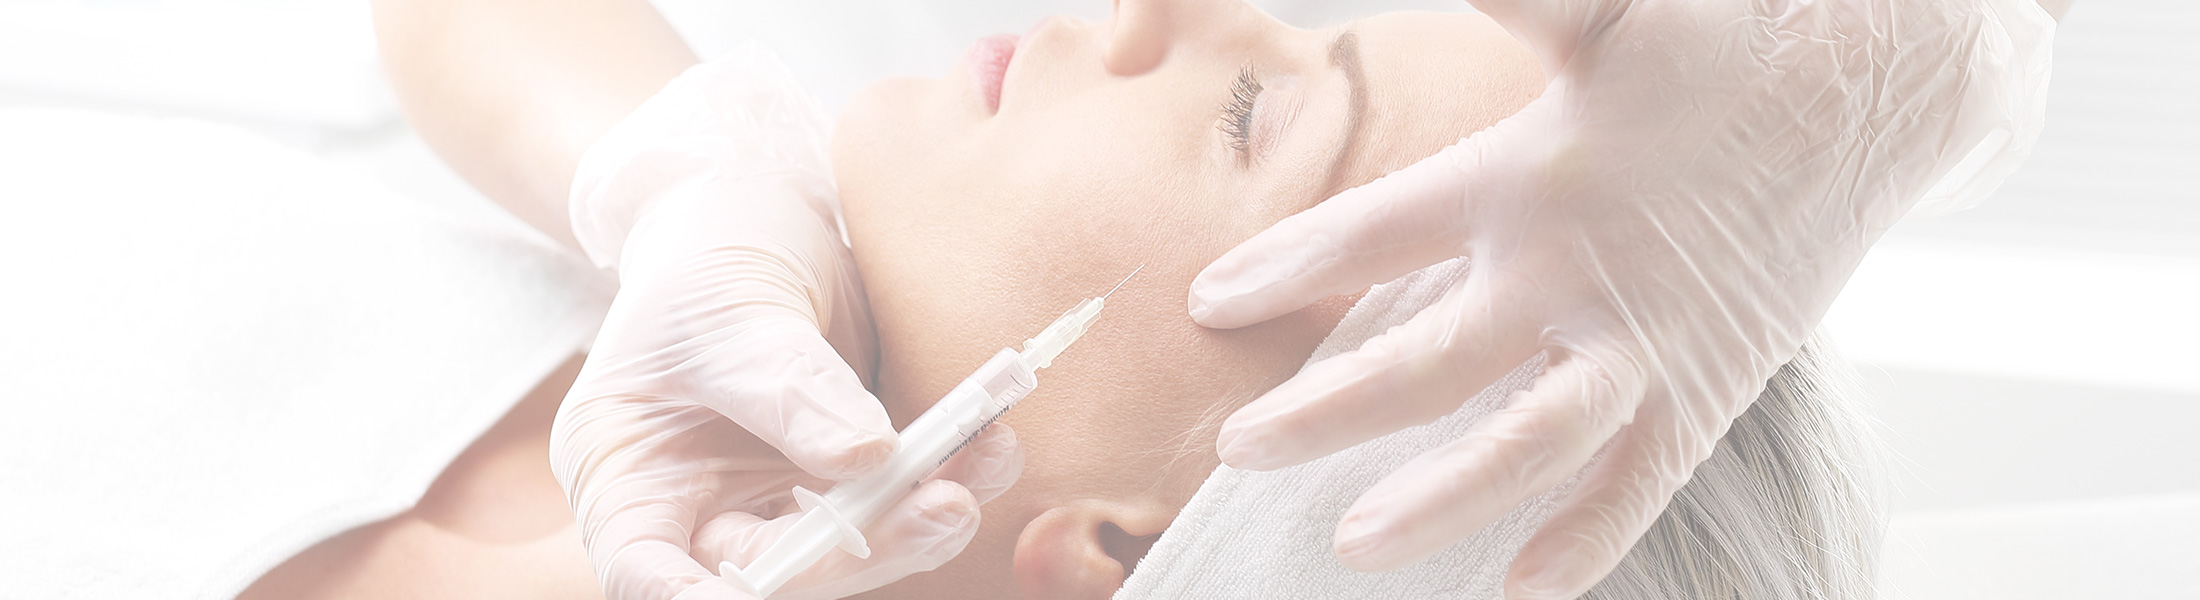 Dokter_Shelly_botox_fillers_injectables